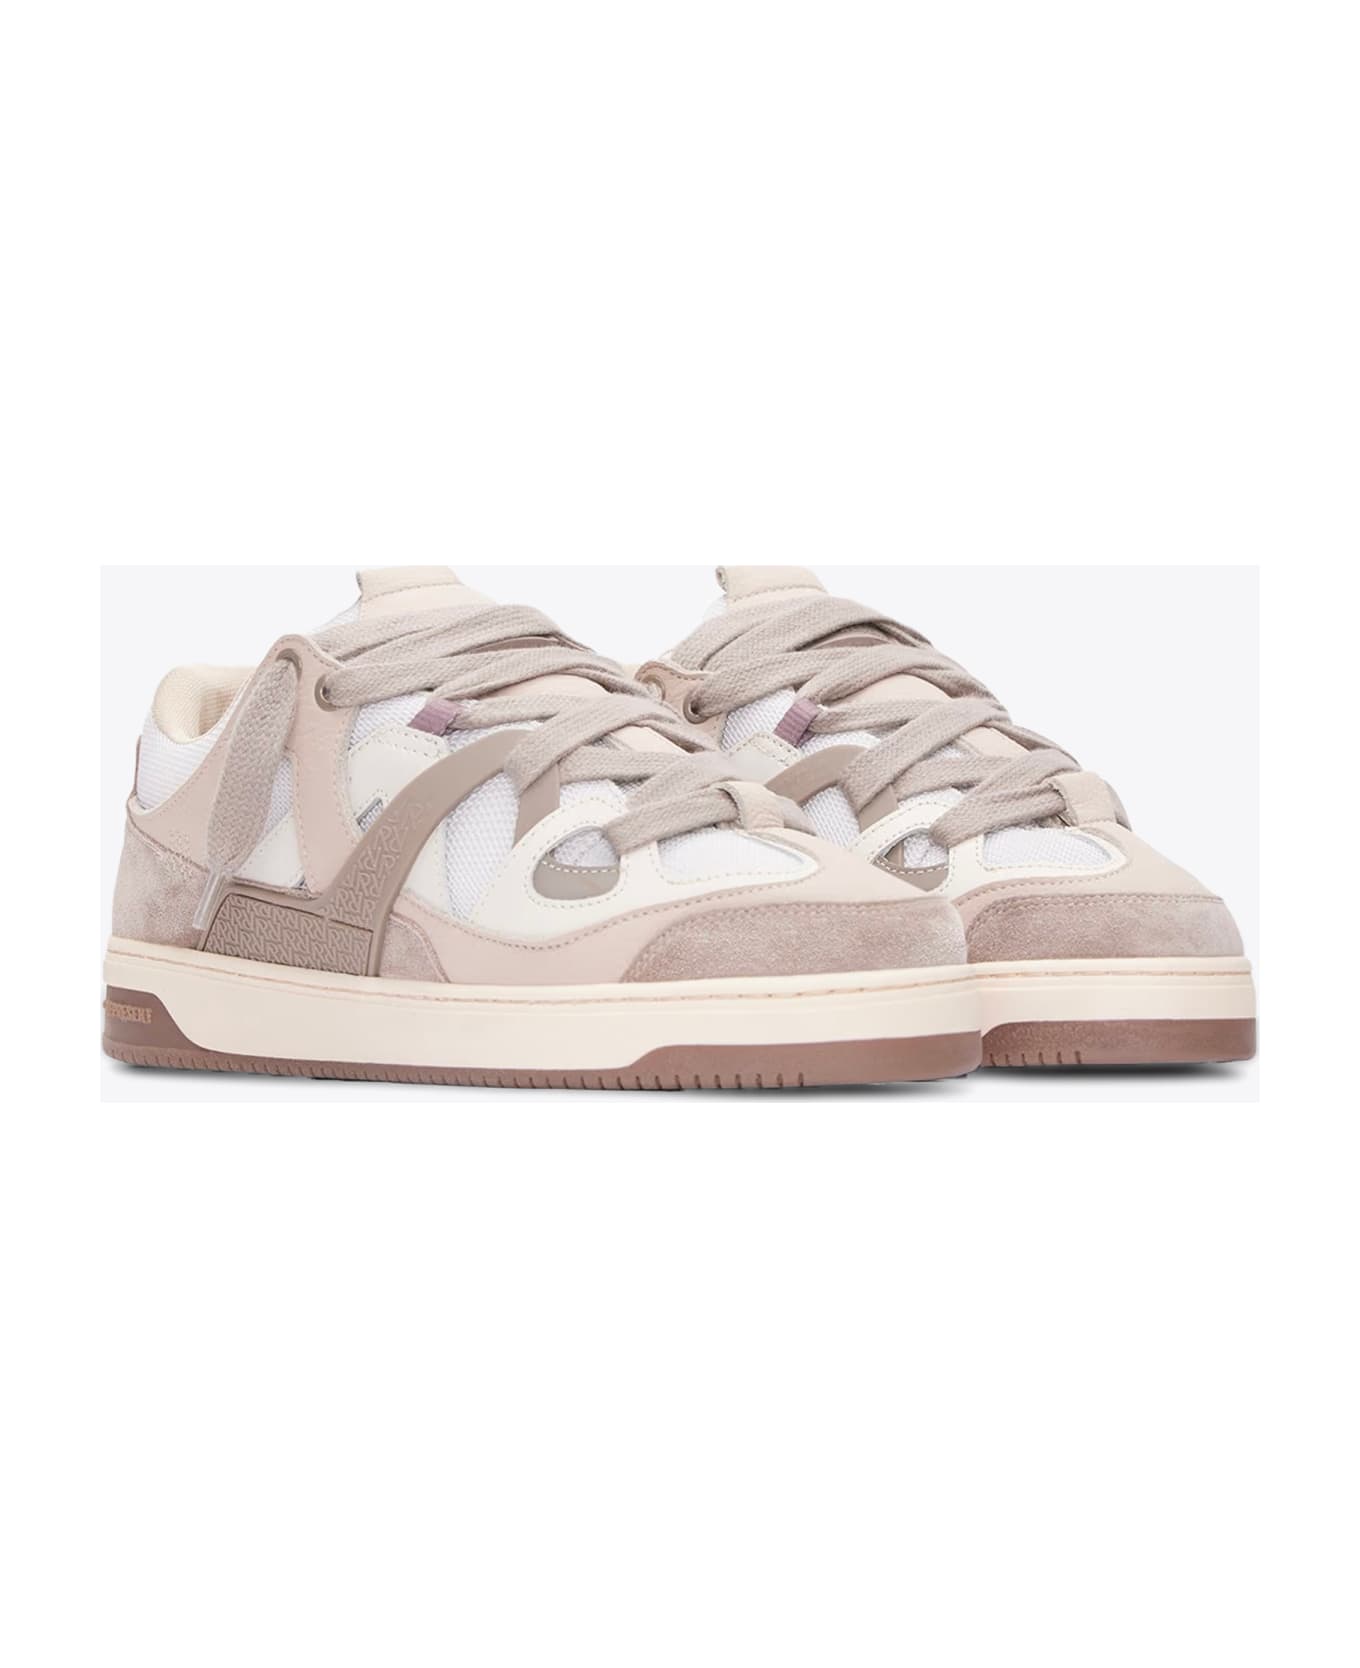 REPRESENT Bully Beige suede and leather skate low sneaker - Bully - Beige